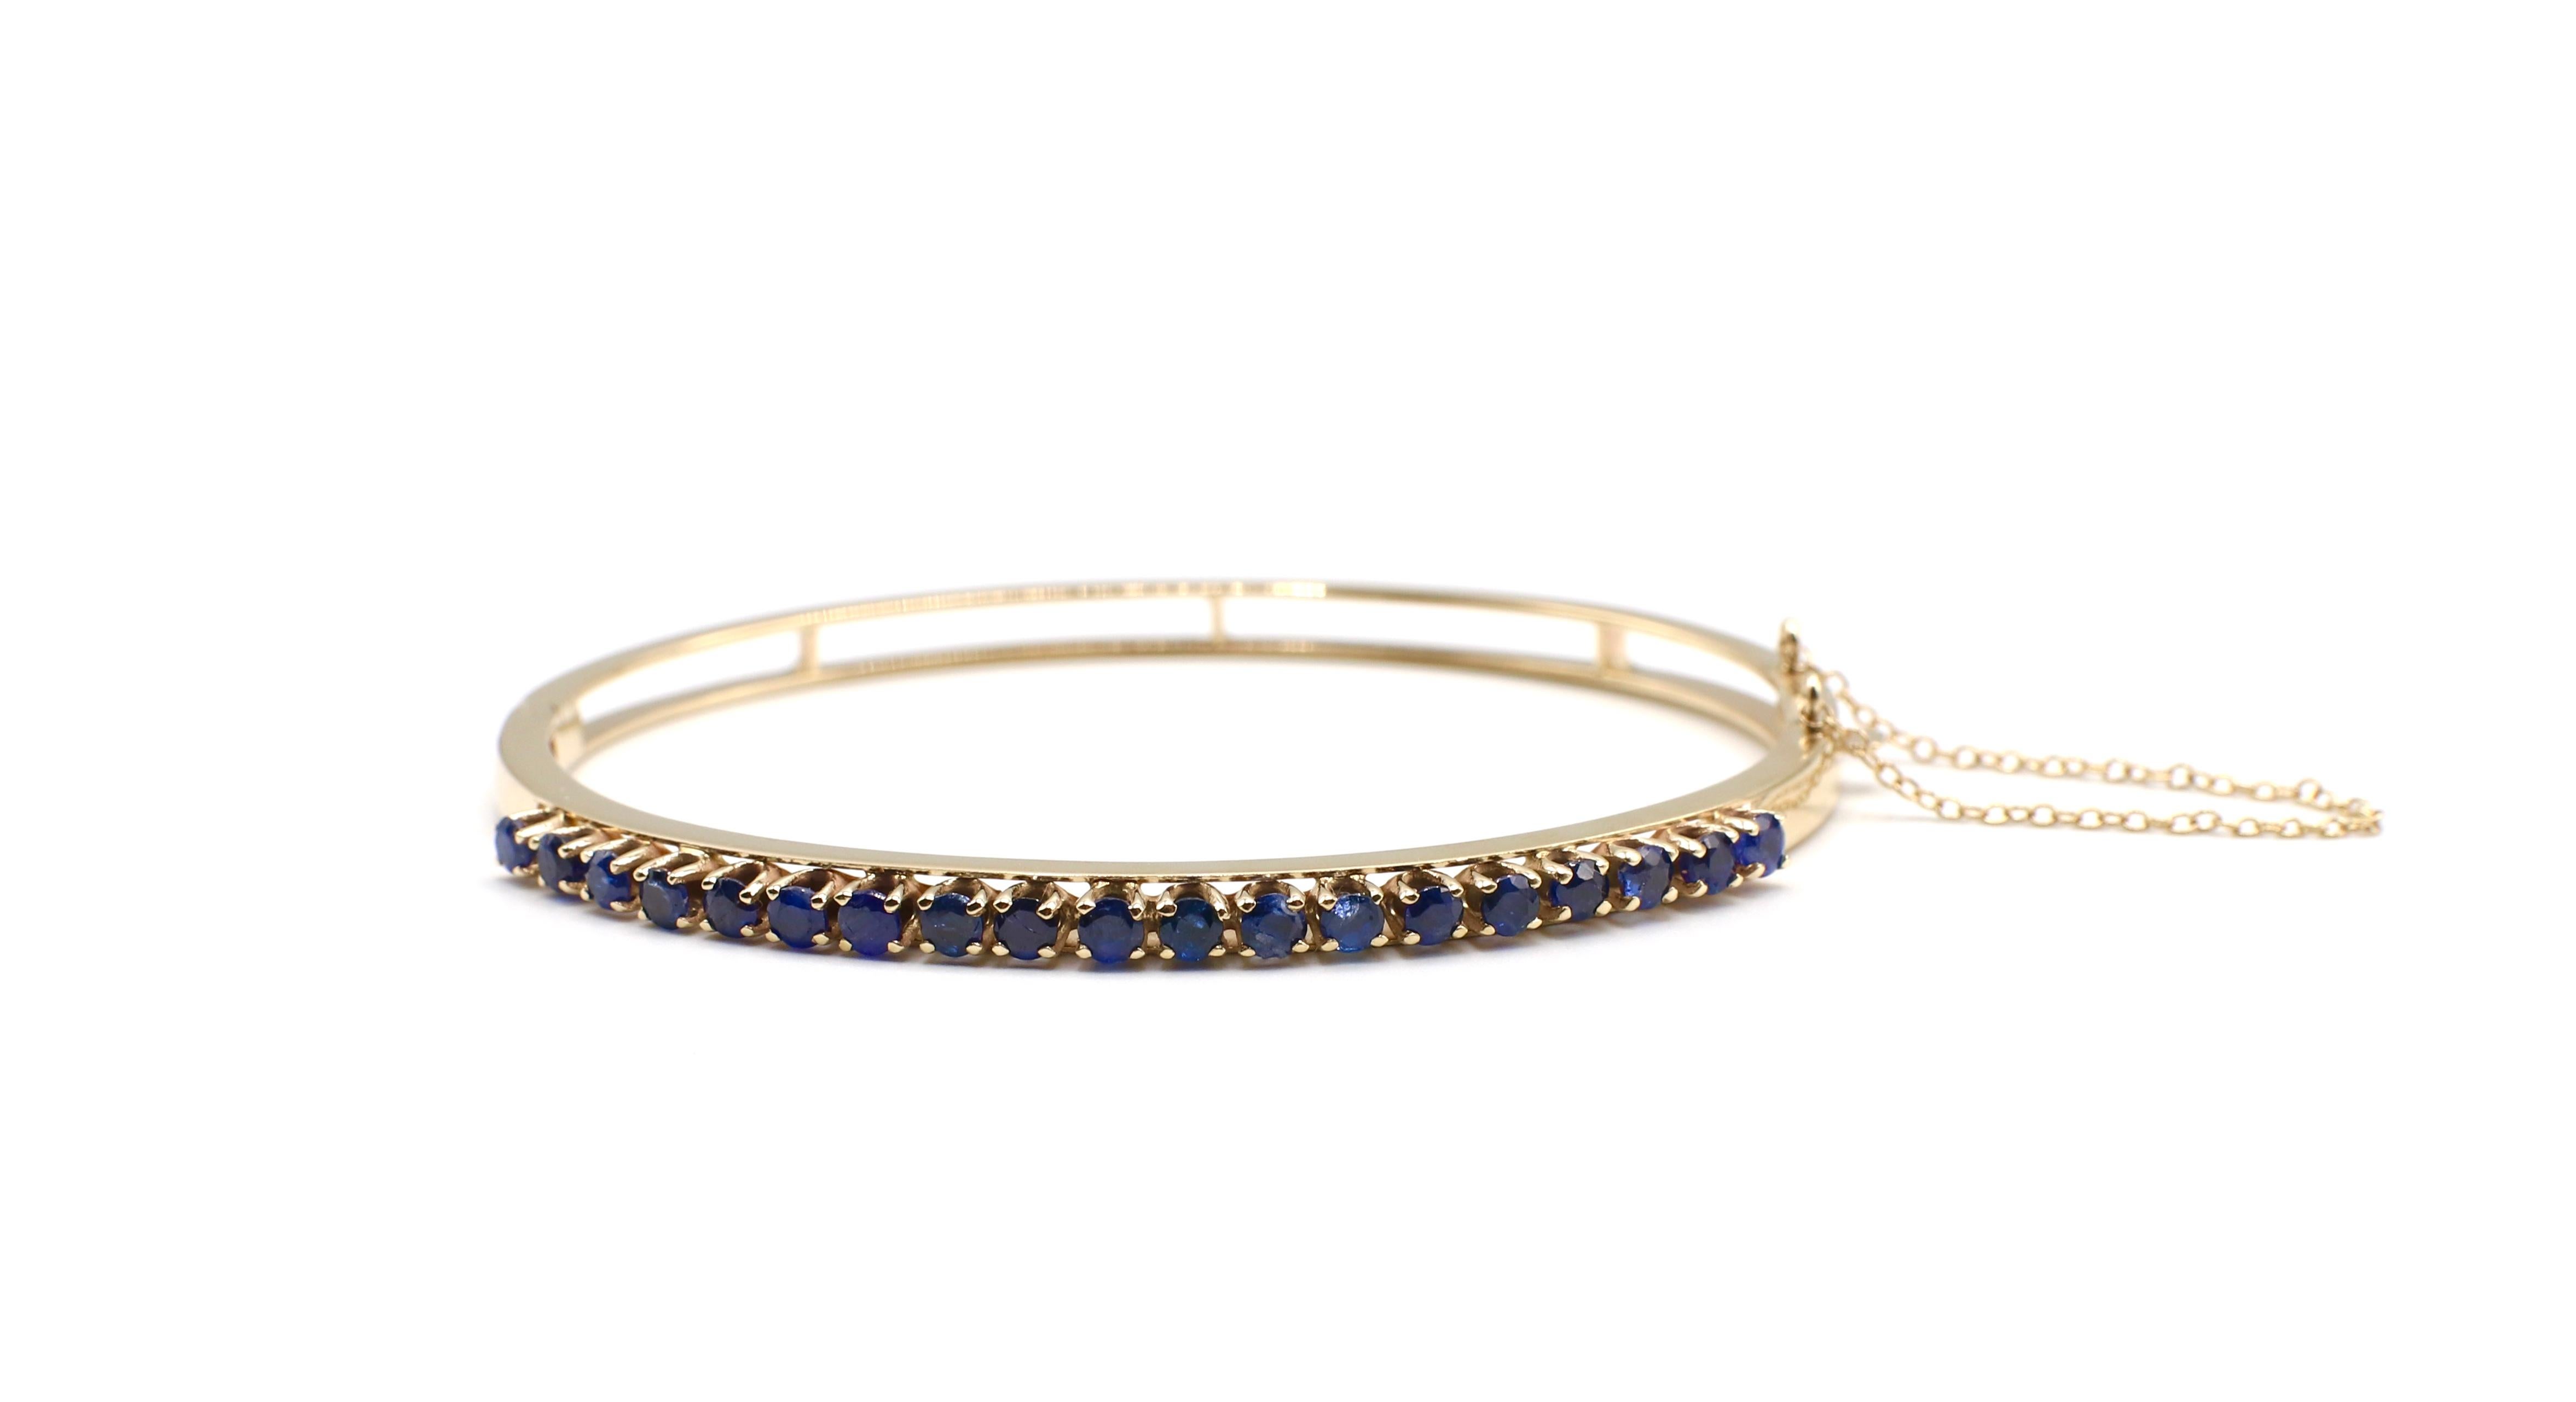 Vintage 14K Yellow Gold Blue Sapphire Hinged Bracelet Bangle

Metal: 14k yellow gold, marked 14k
Weight: 10.54 grams
Sapphires: 19 round blue sapphires, approx. 2.85 CTW
Diameter: 2.5